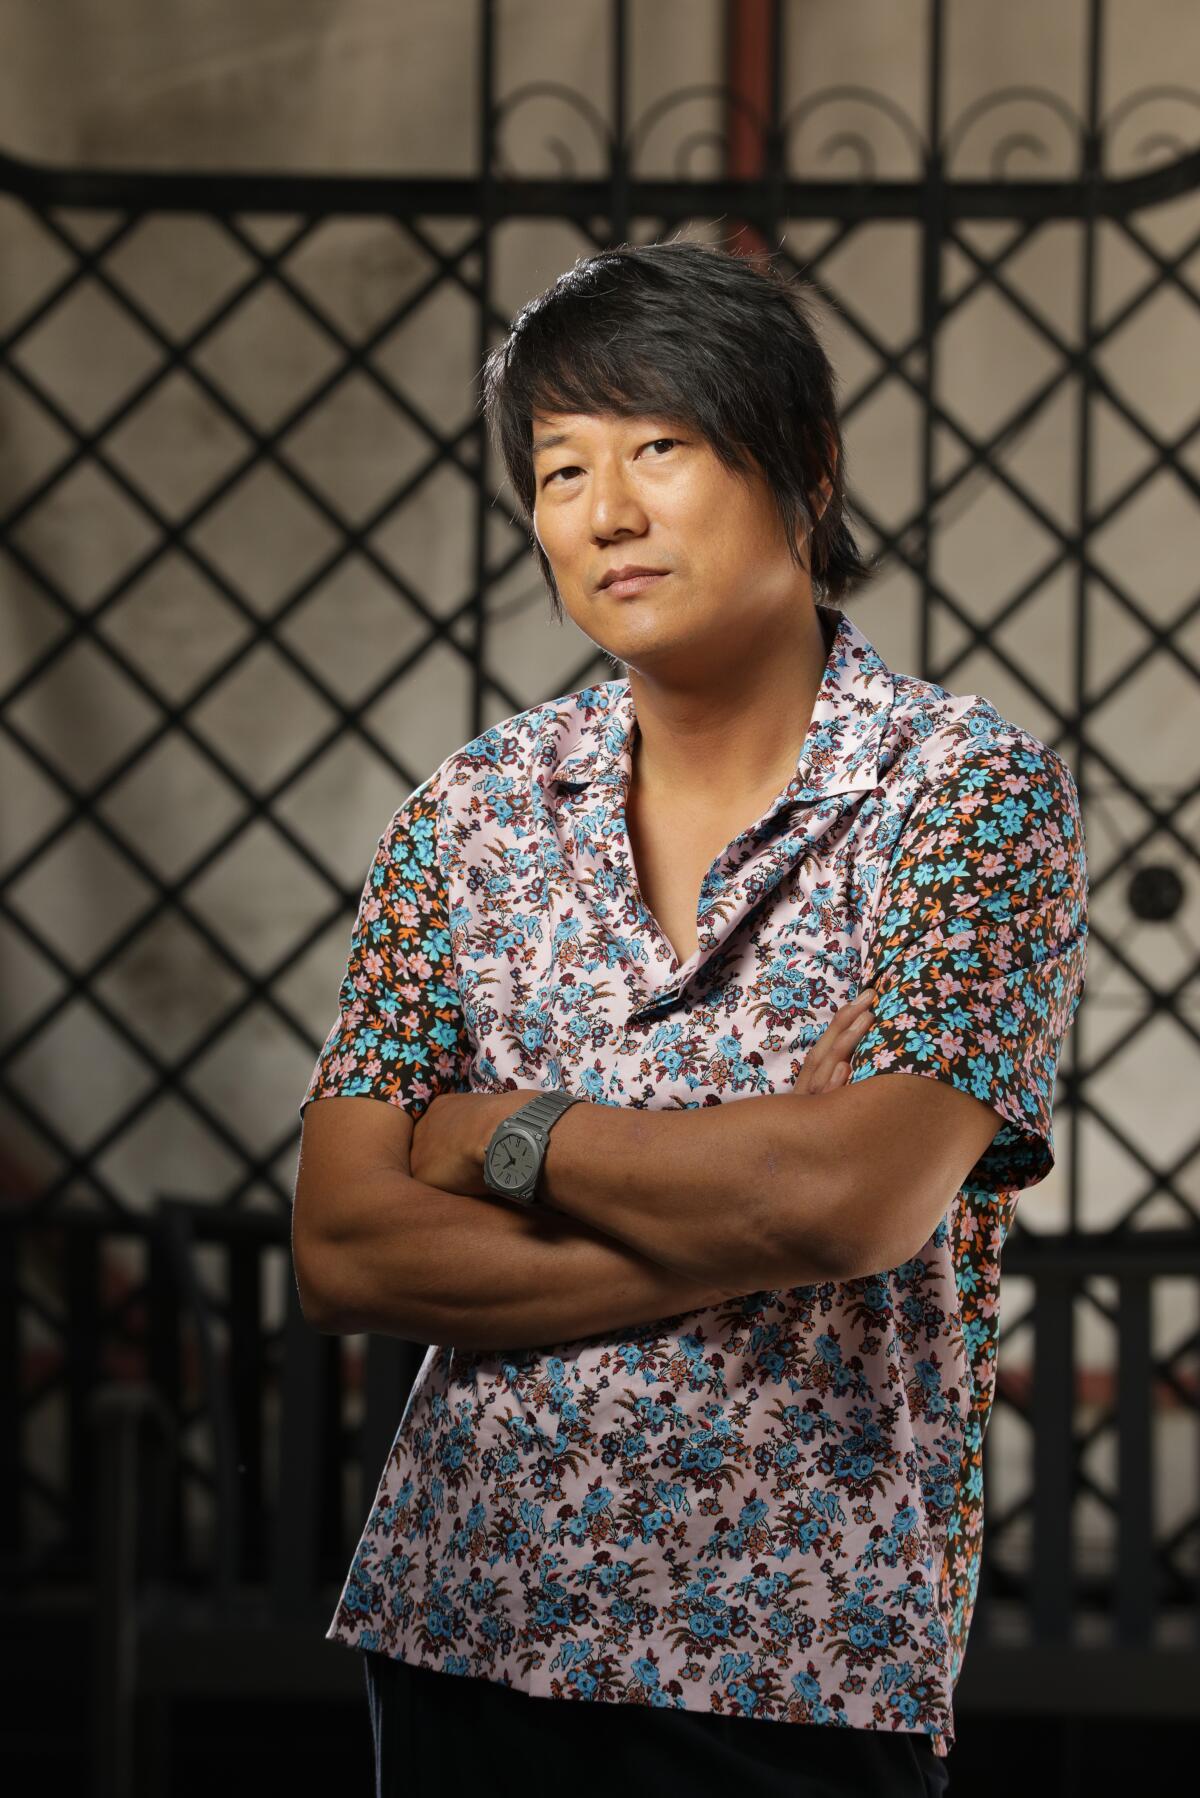  Sung Kang Photographed  June 12, 2021 in Universal City, CA. (Myung J. Chun / Los Angeles Times)